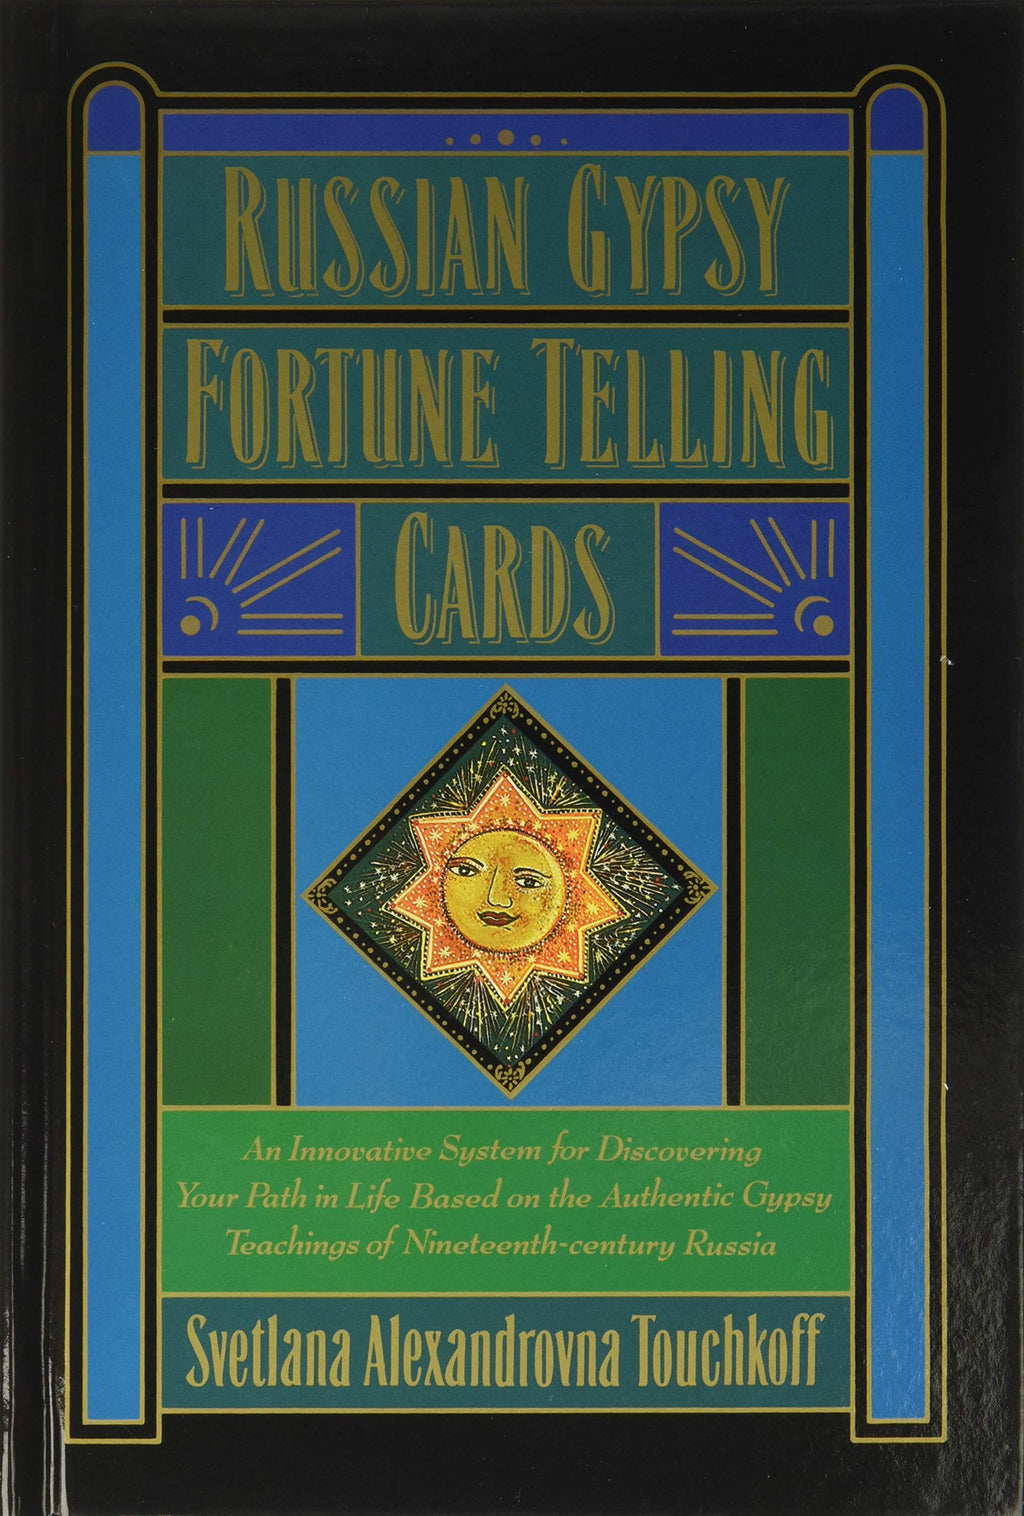 Russian Gypsy Fortune Telling Cards - Lighten Up Shop